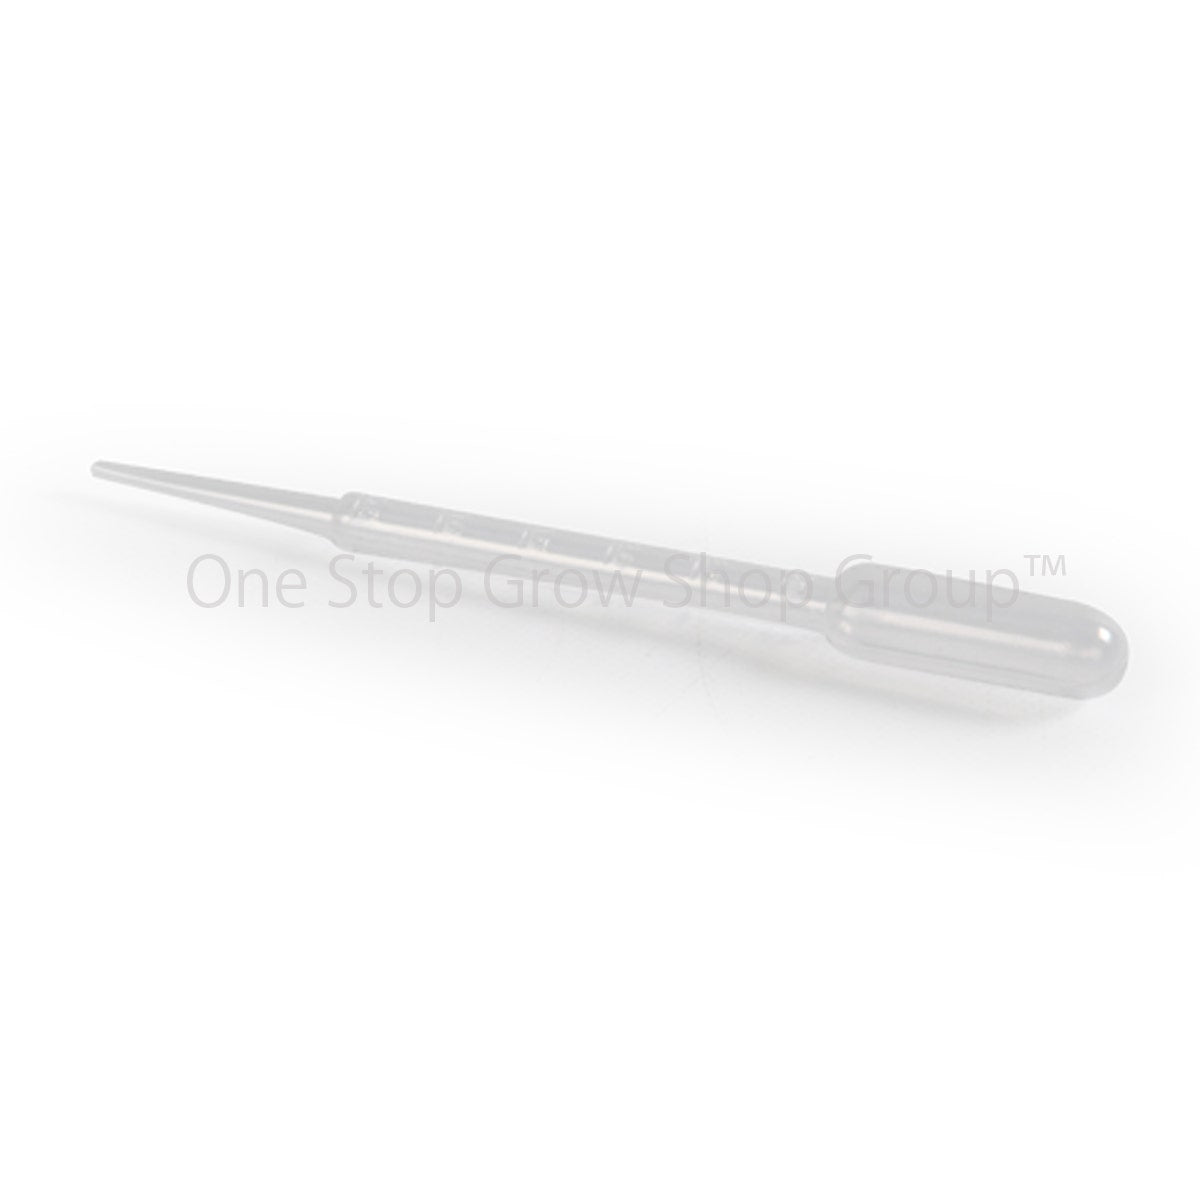 3ml Pipette with 0.5ml Graduations